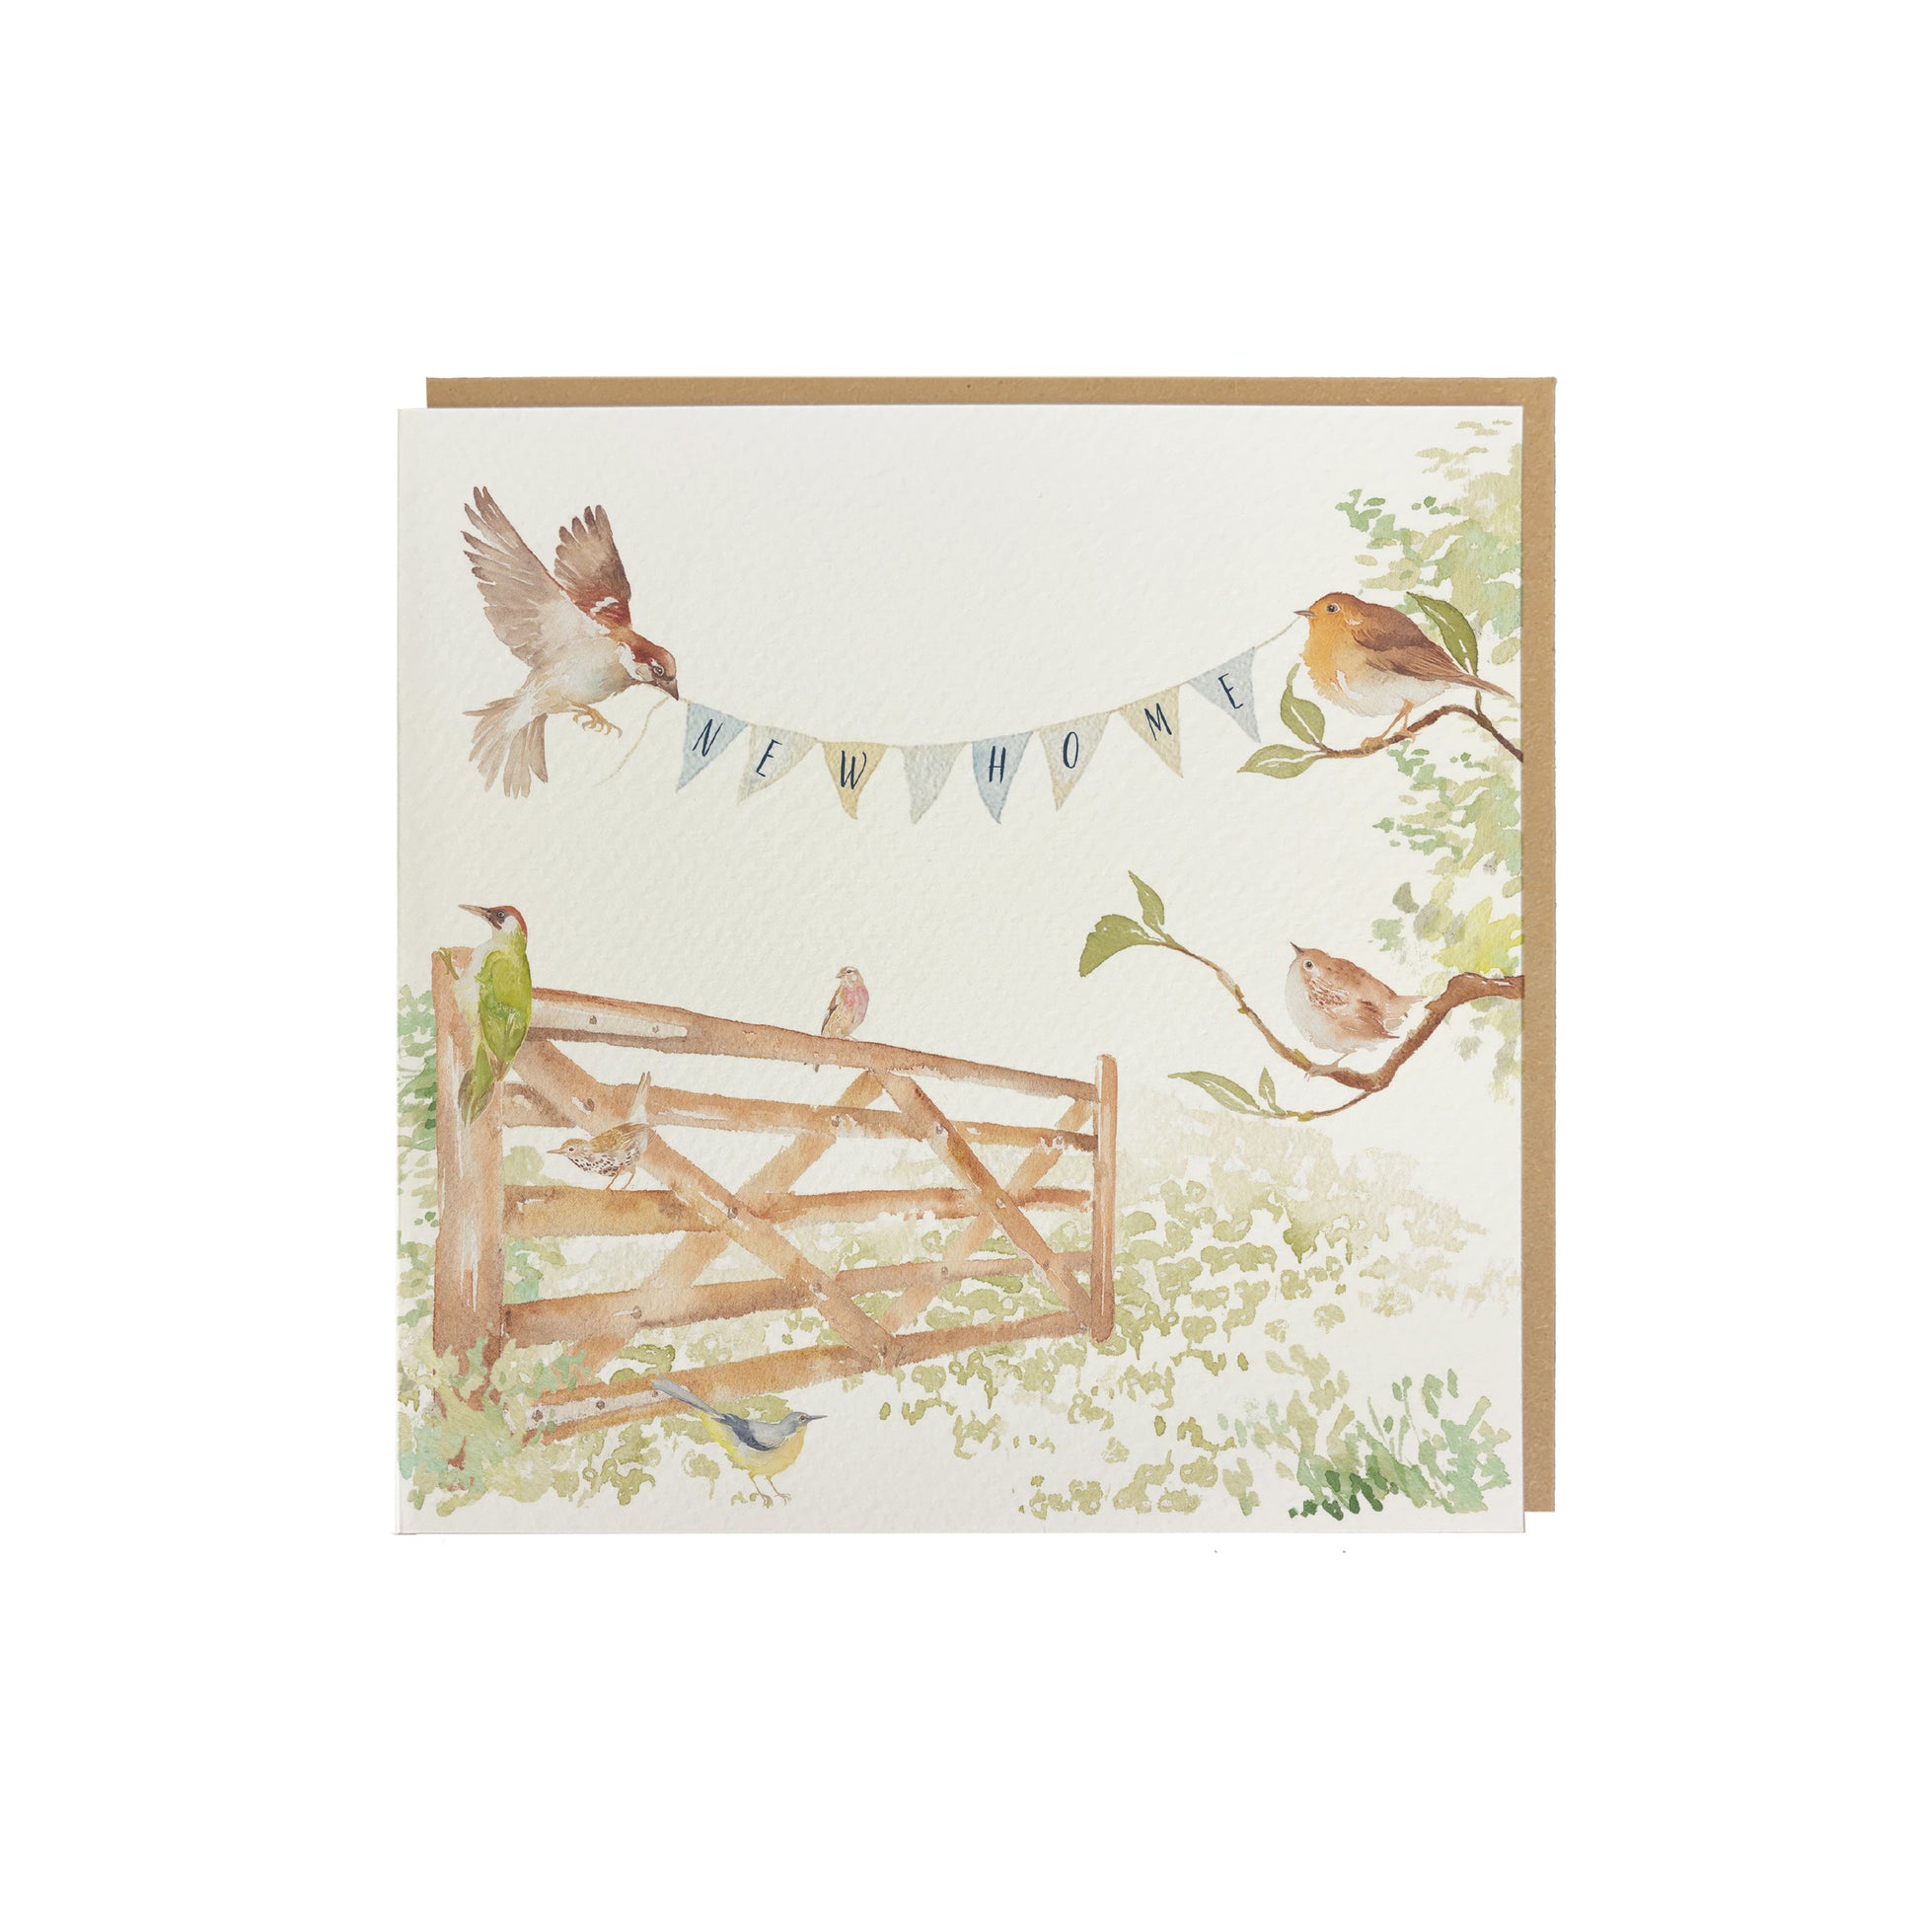 A greetings card reading New Home on bunting held by a sparrow and a robin above an open garden gate in a watercolour style. The card has a recyclable brown kraft envelope behind it.